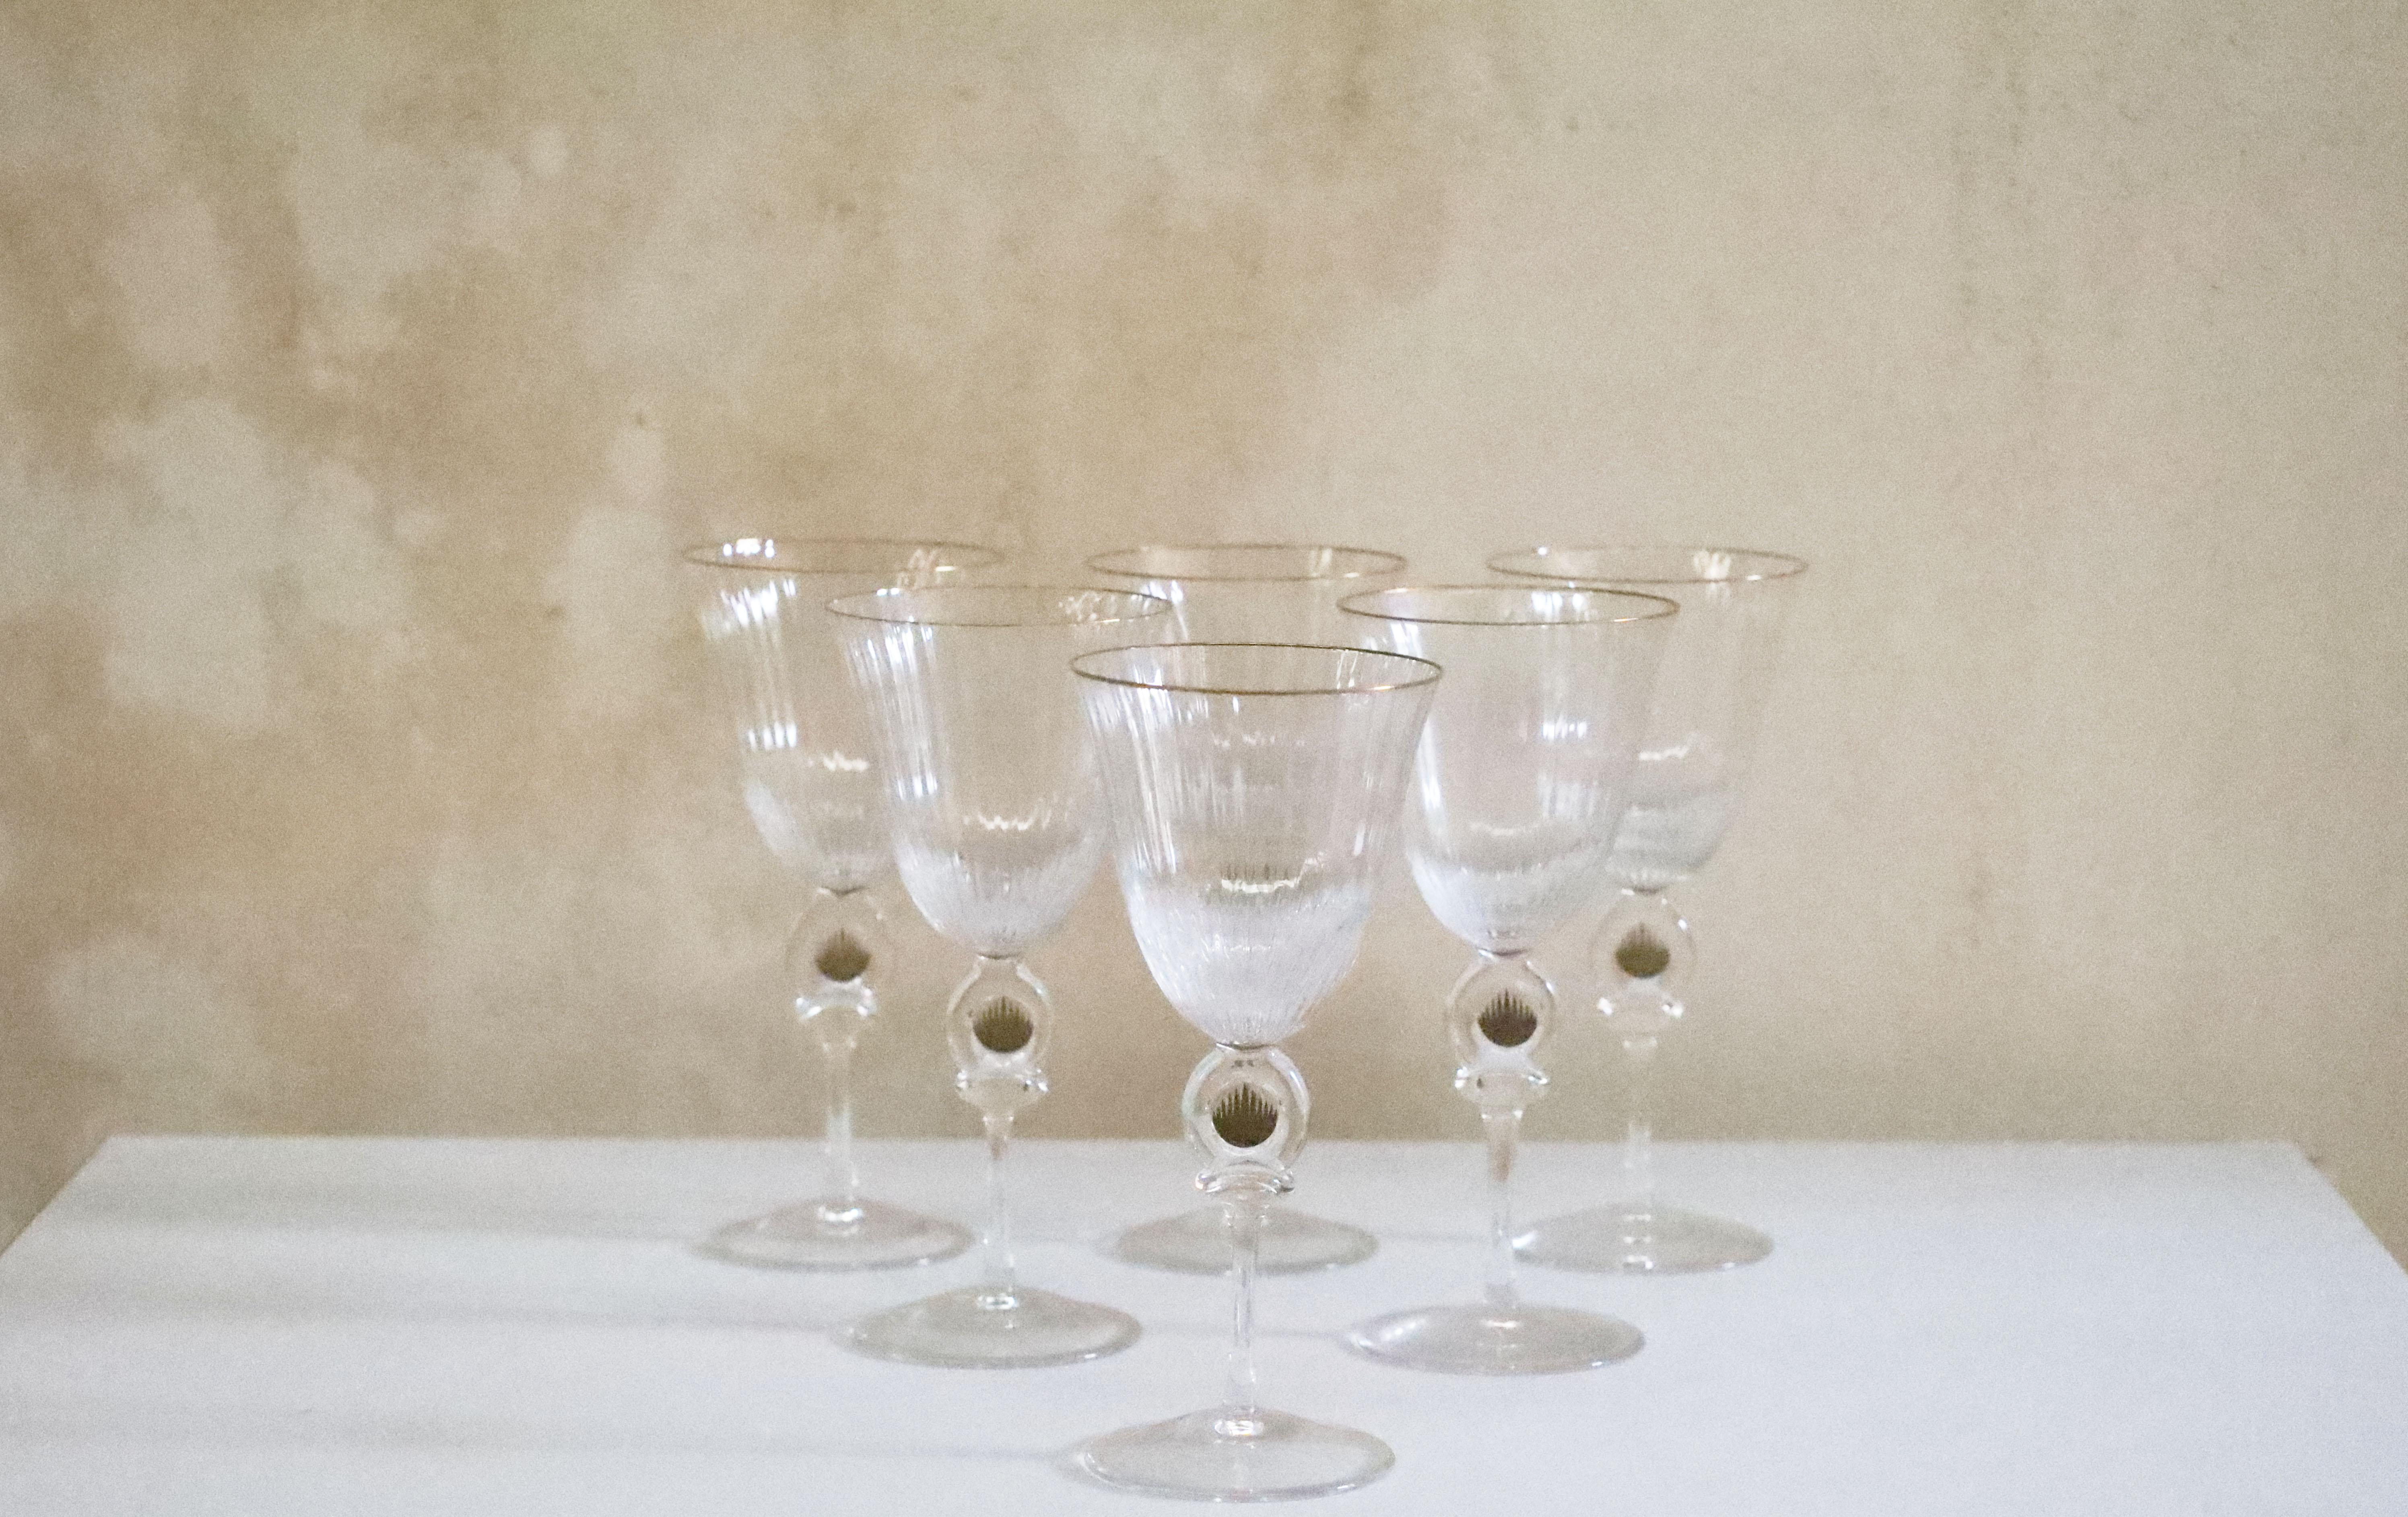 Set of 6 crystal wine glasses. Gold edges and a very elegant.
Comes with original Box. Impeccable.